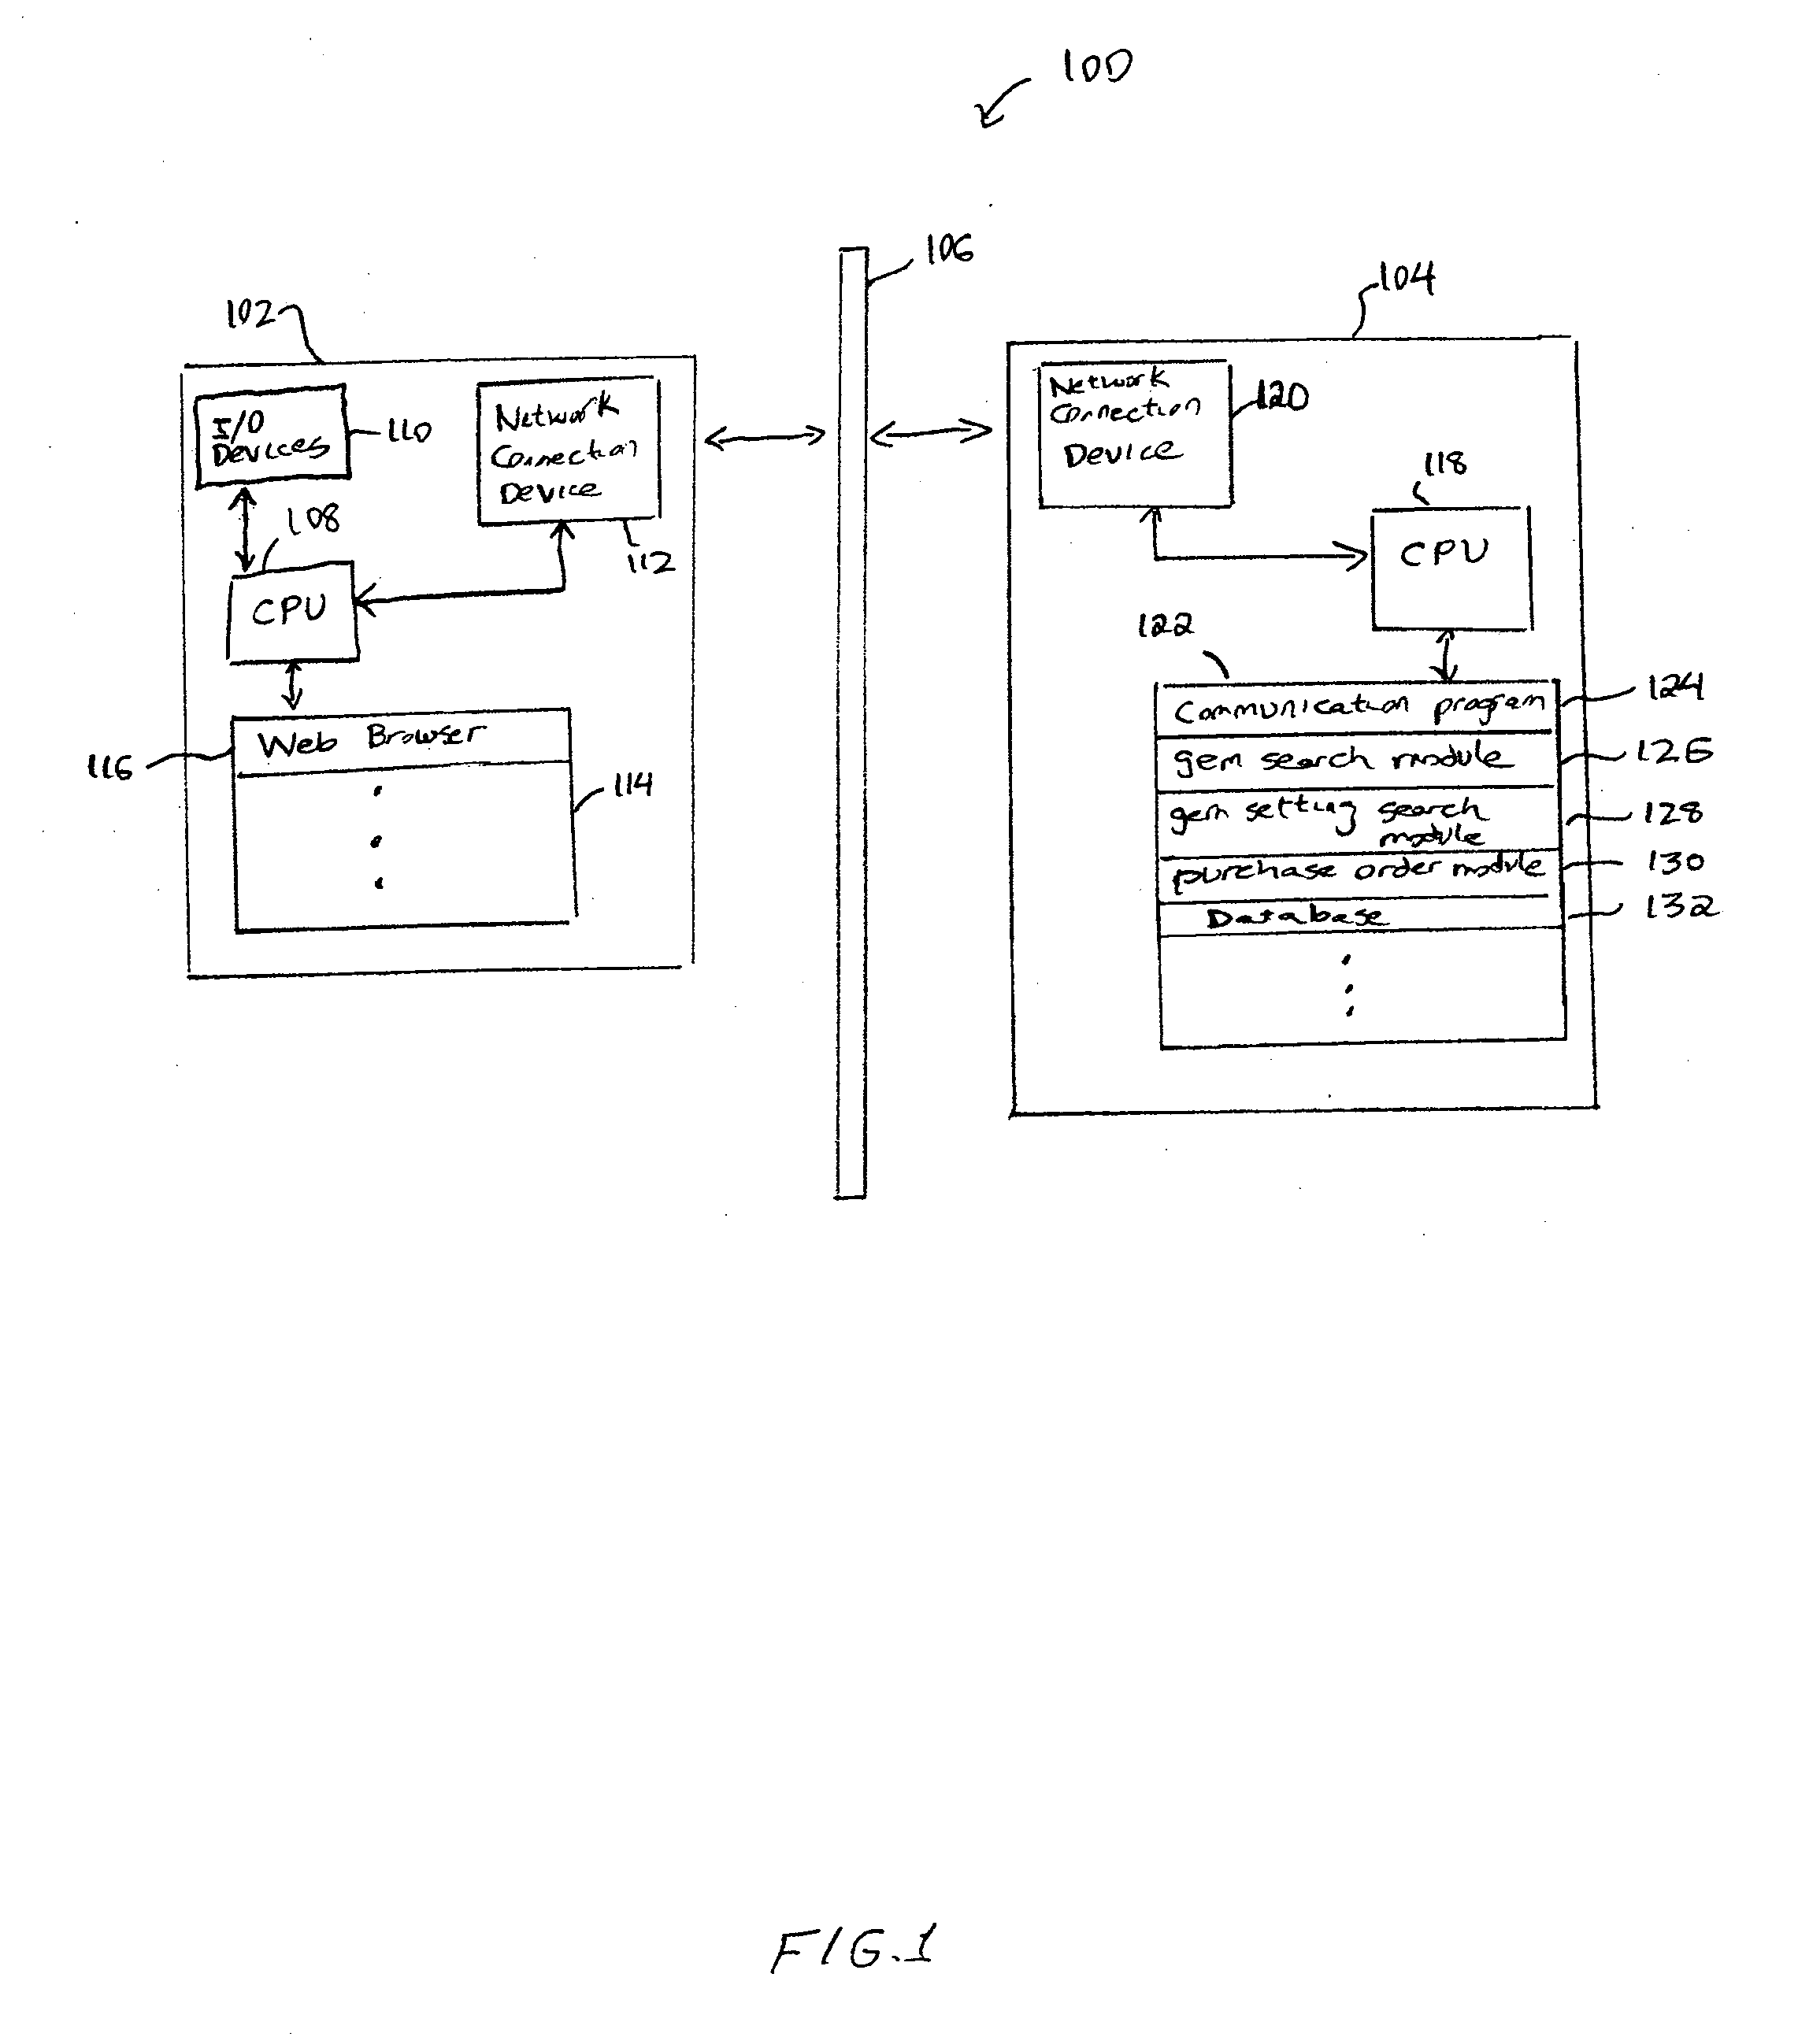 Apparatus and method for facilitating a search for gem settings